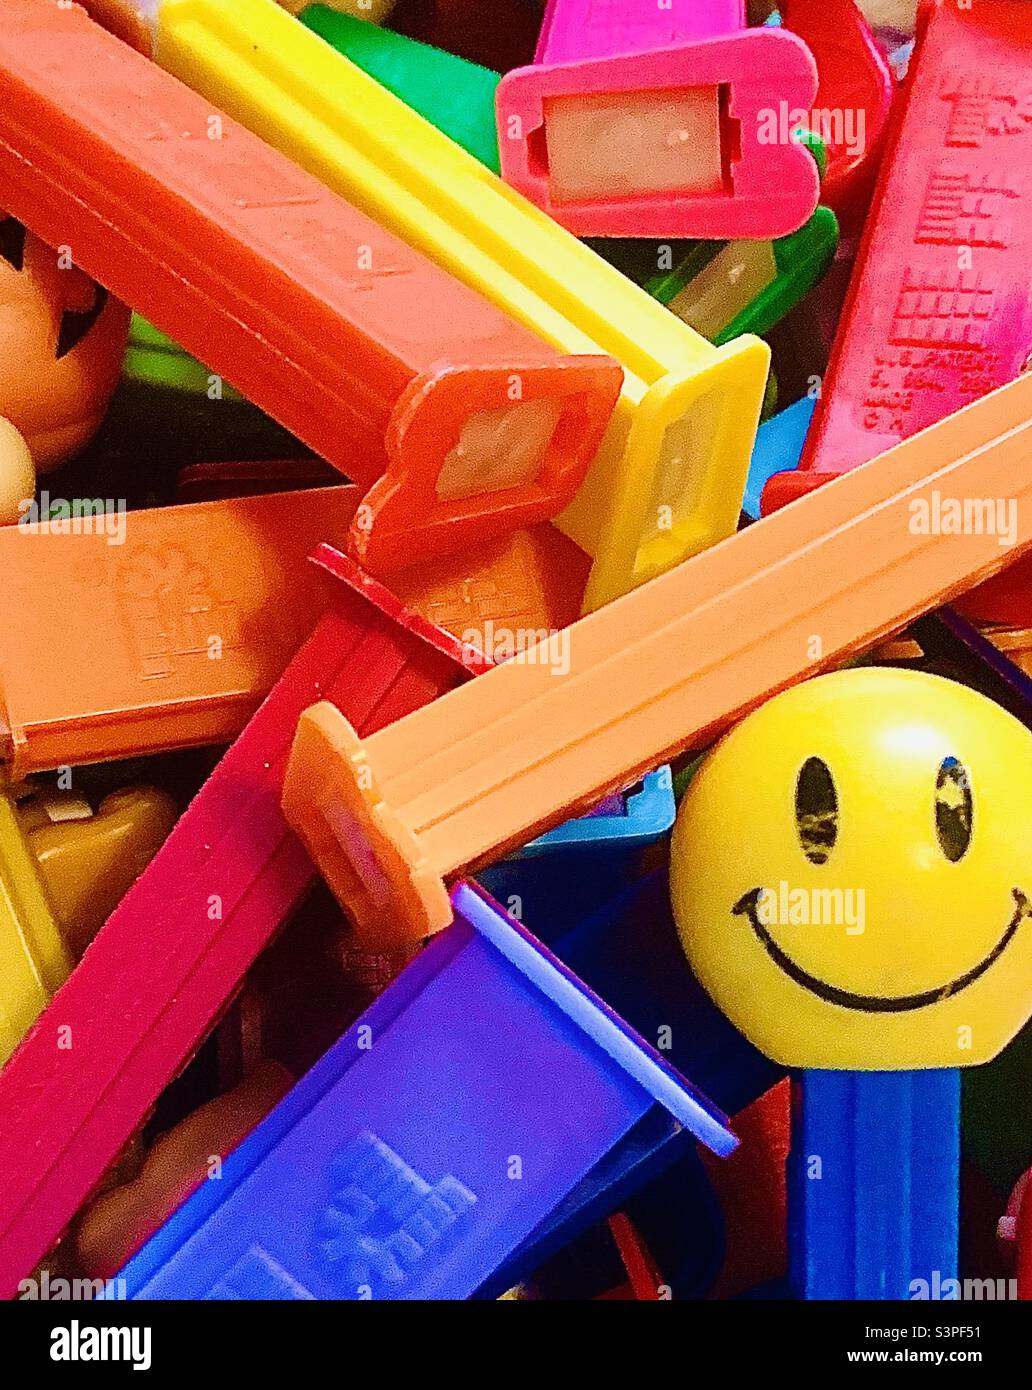 Colorful collection of Pez Dispensers with yellow smiling face Pez Dispenser in lower right corner Stock Photo